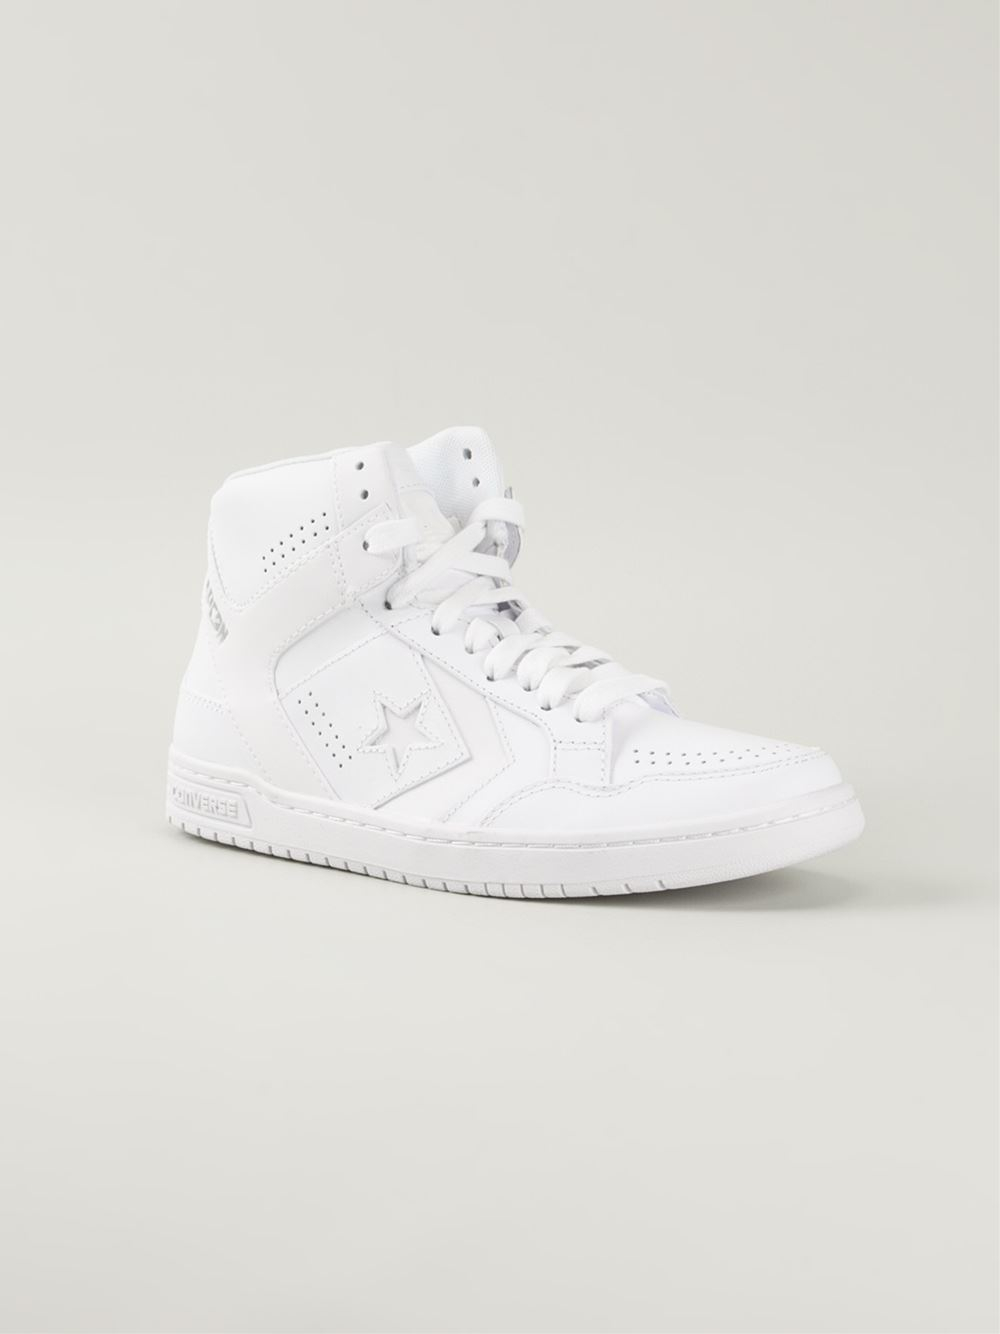 Barry erosion Ombord Converse 'Weapon' Hi-Top Sneakers in White for Men | Lyst